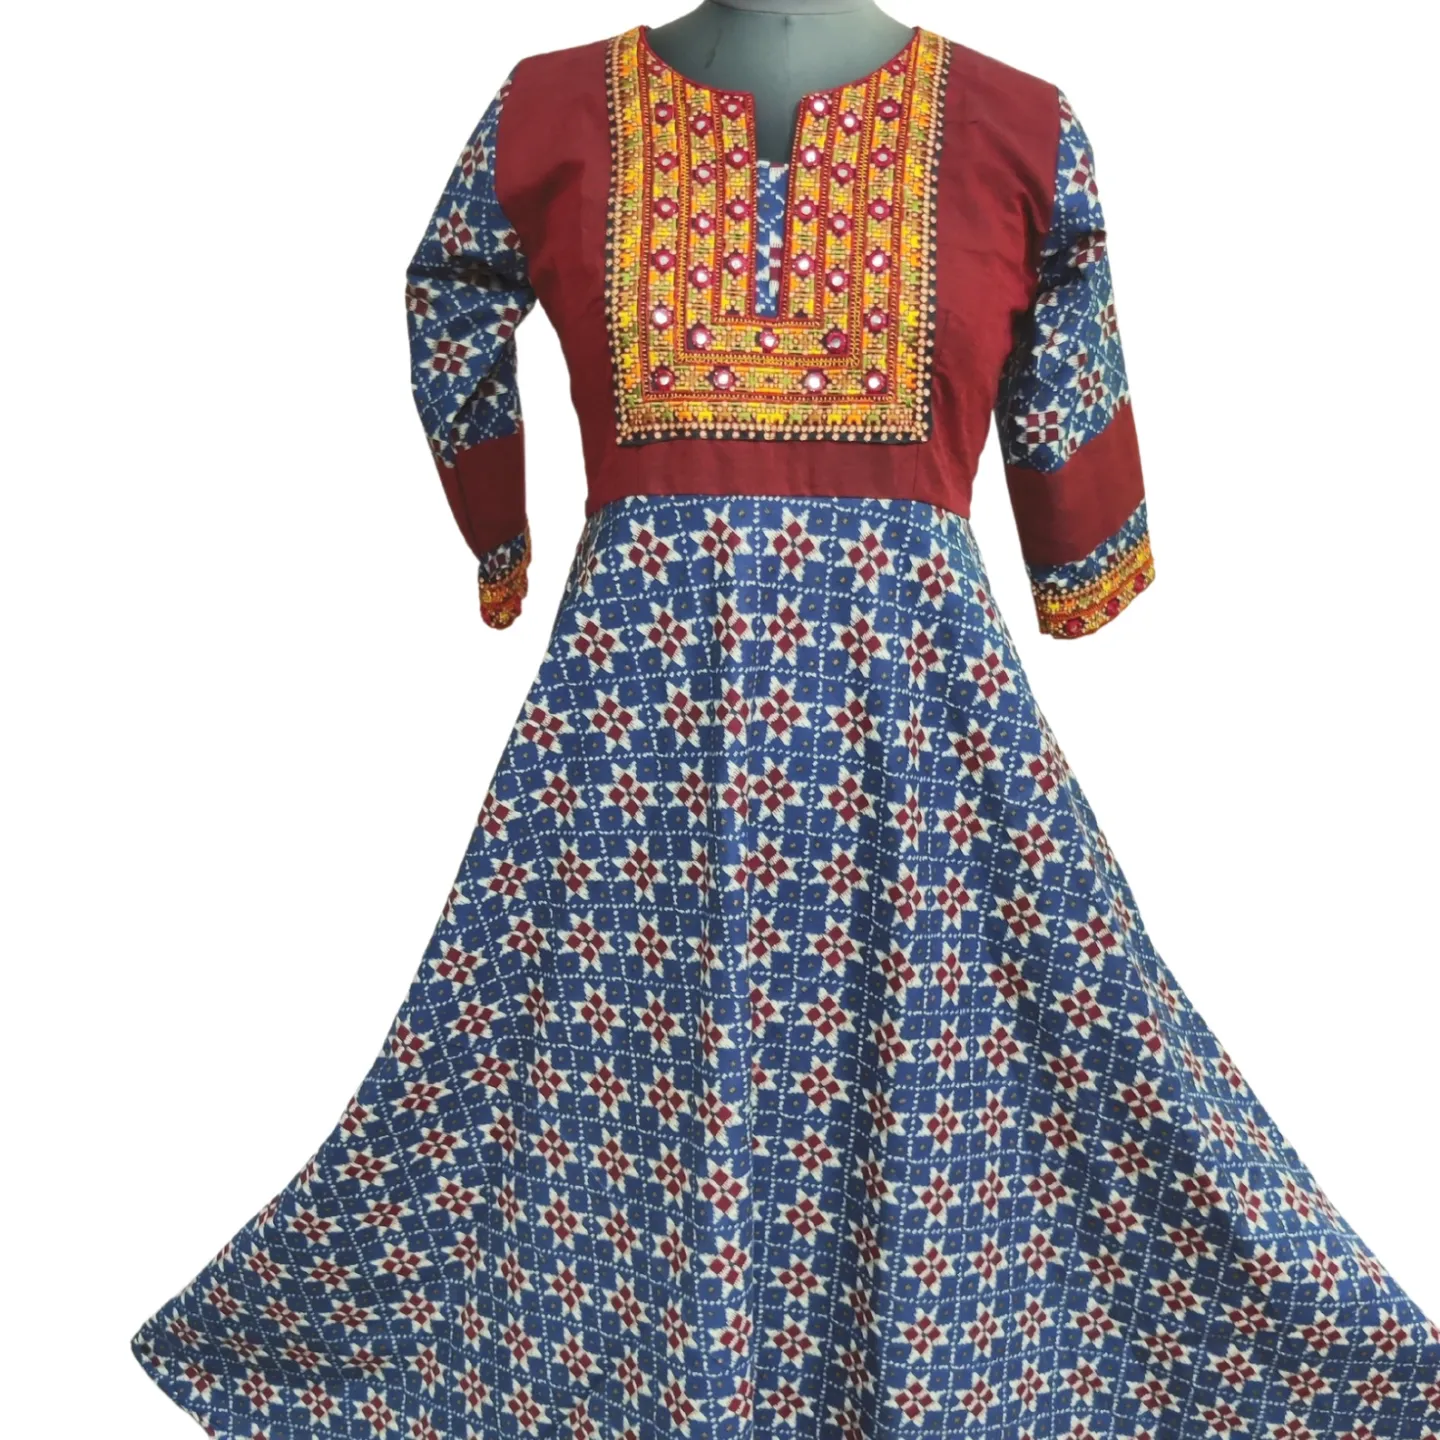 Product image with price: Rs. 690, ID: kuch-work-dress-ced91b78